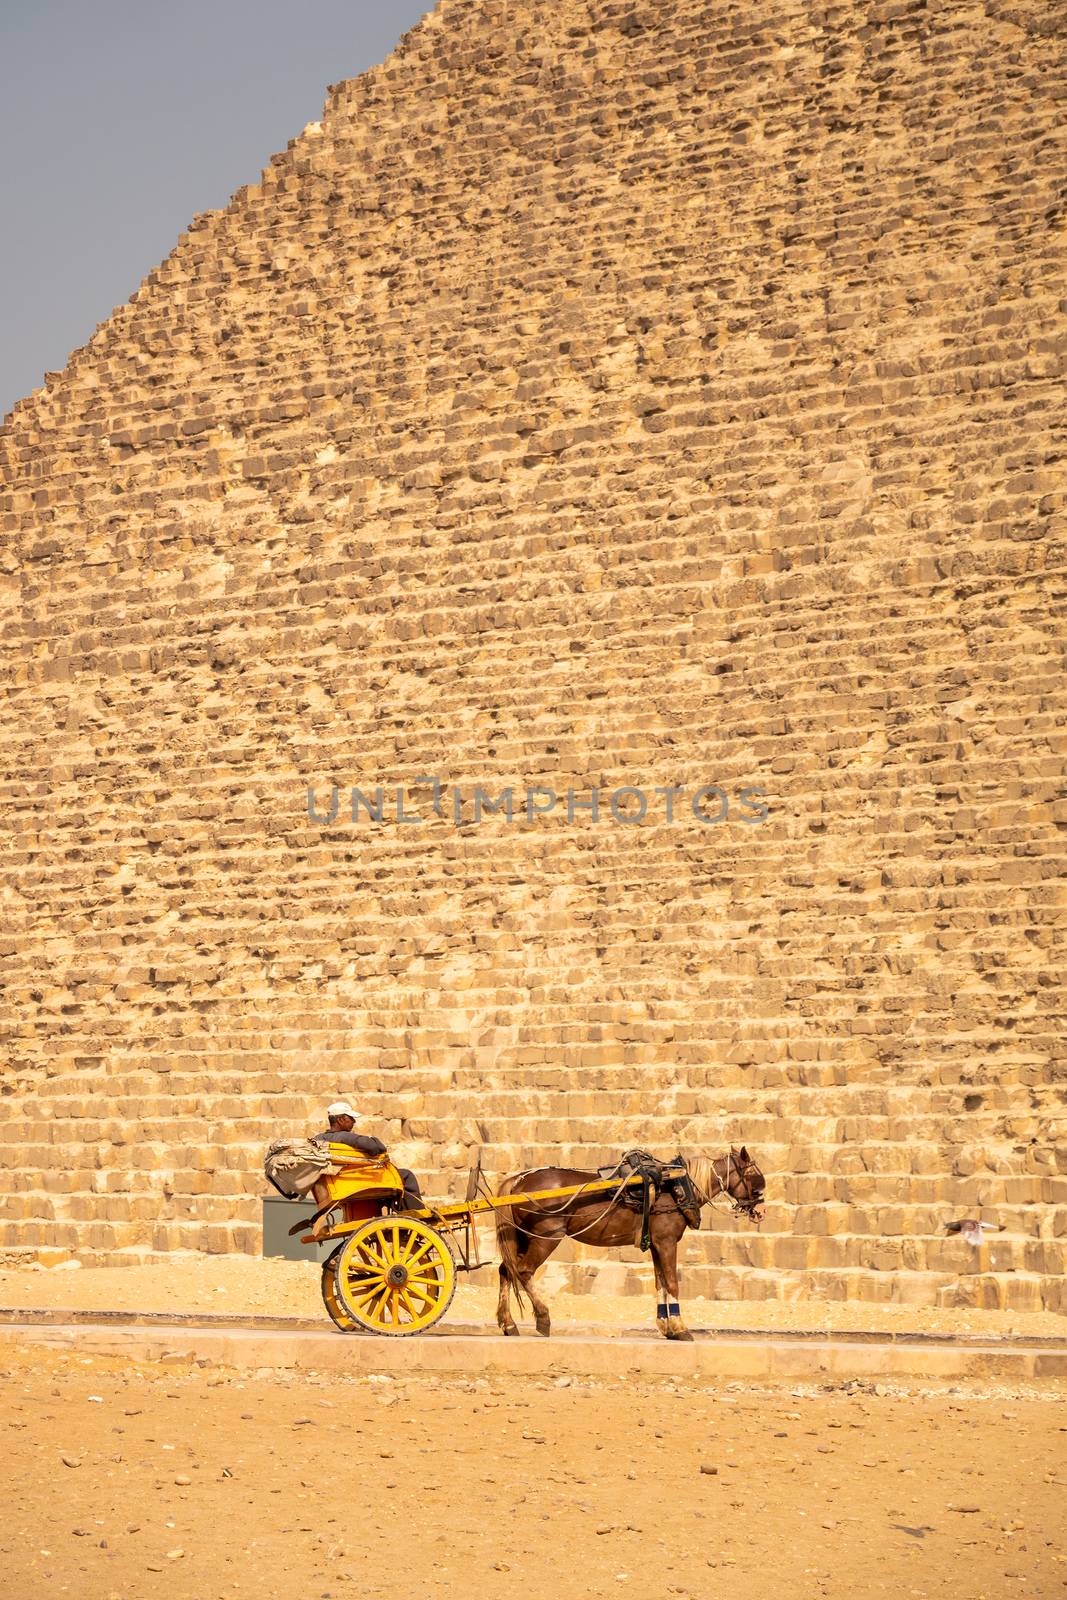 An image of a horse driver at the pyramids of Giza Cairo Egypt waiting for a tourist